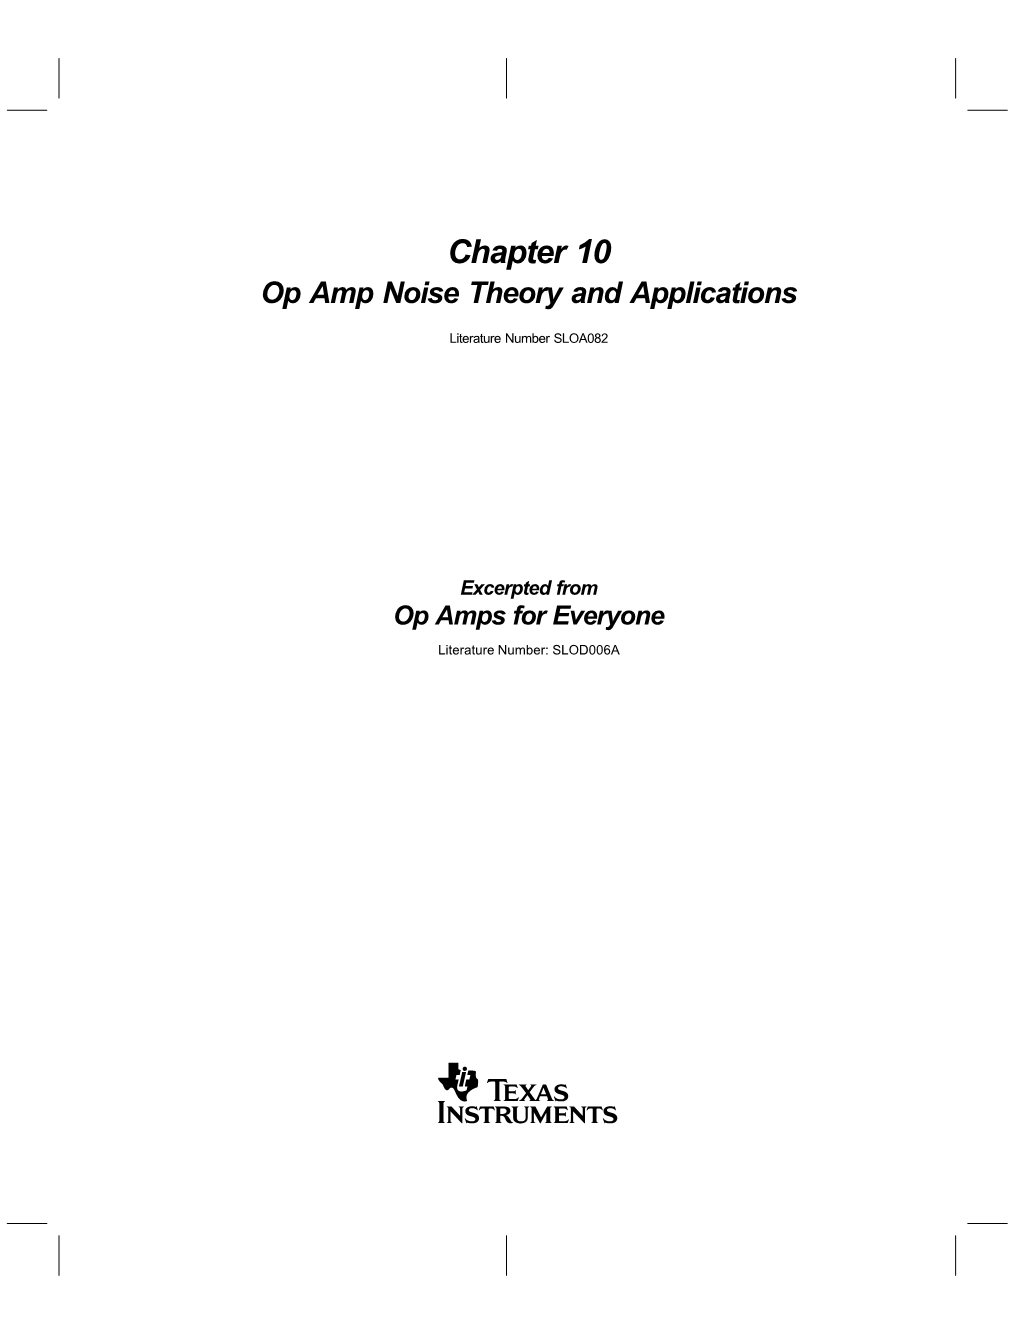 Chapter 10 Op Amp Noise Theory and Applications